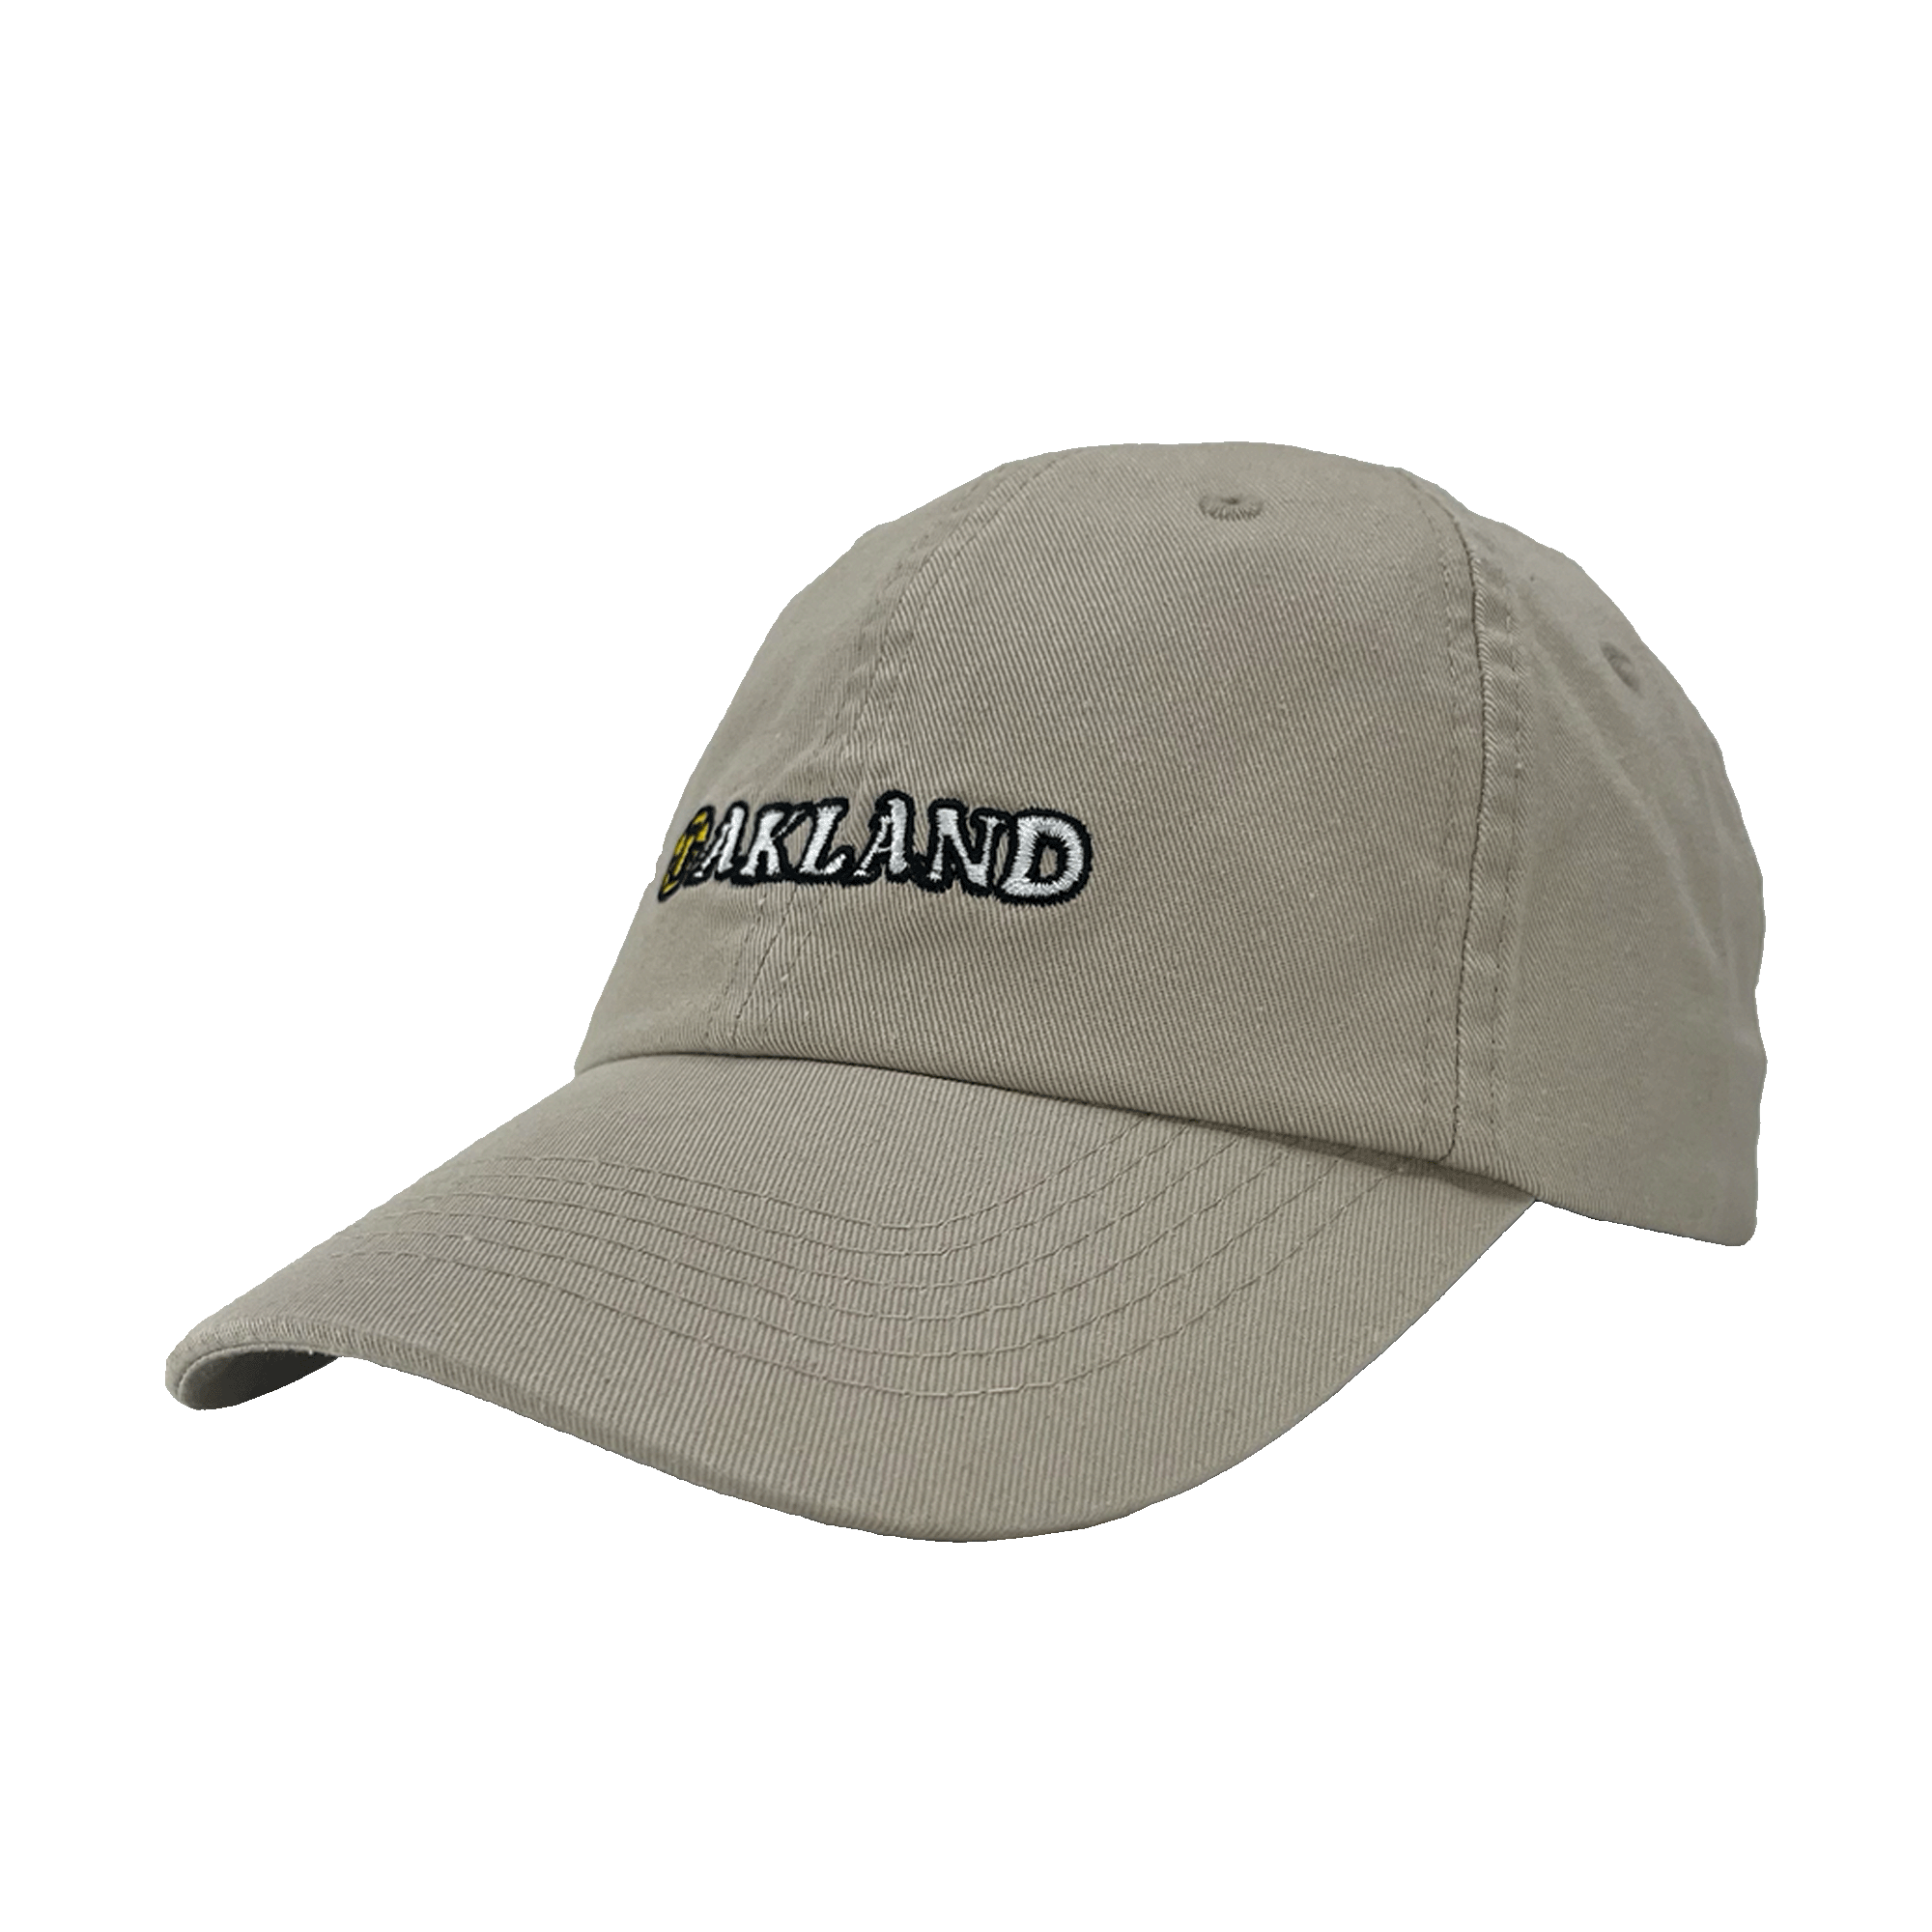 Angled side view of khaki Oakland Dad Hat, with embroidered design by Dustin O. Canalin (DOC).